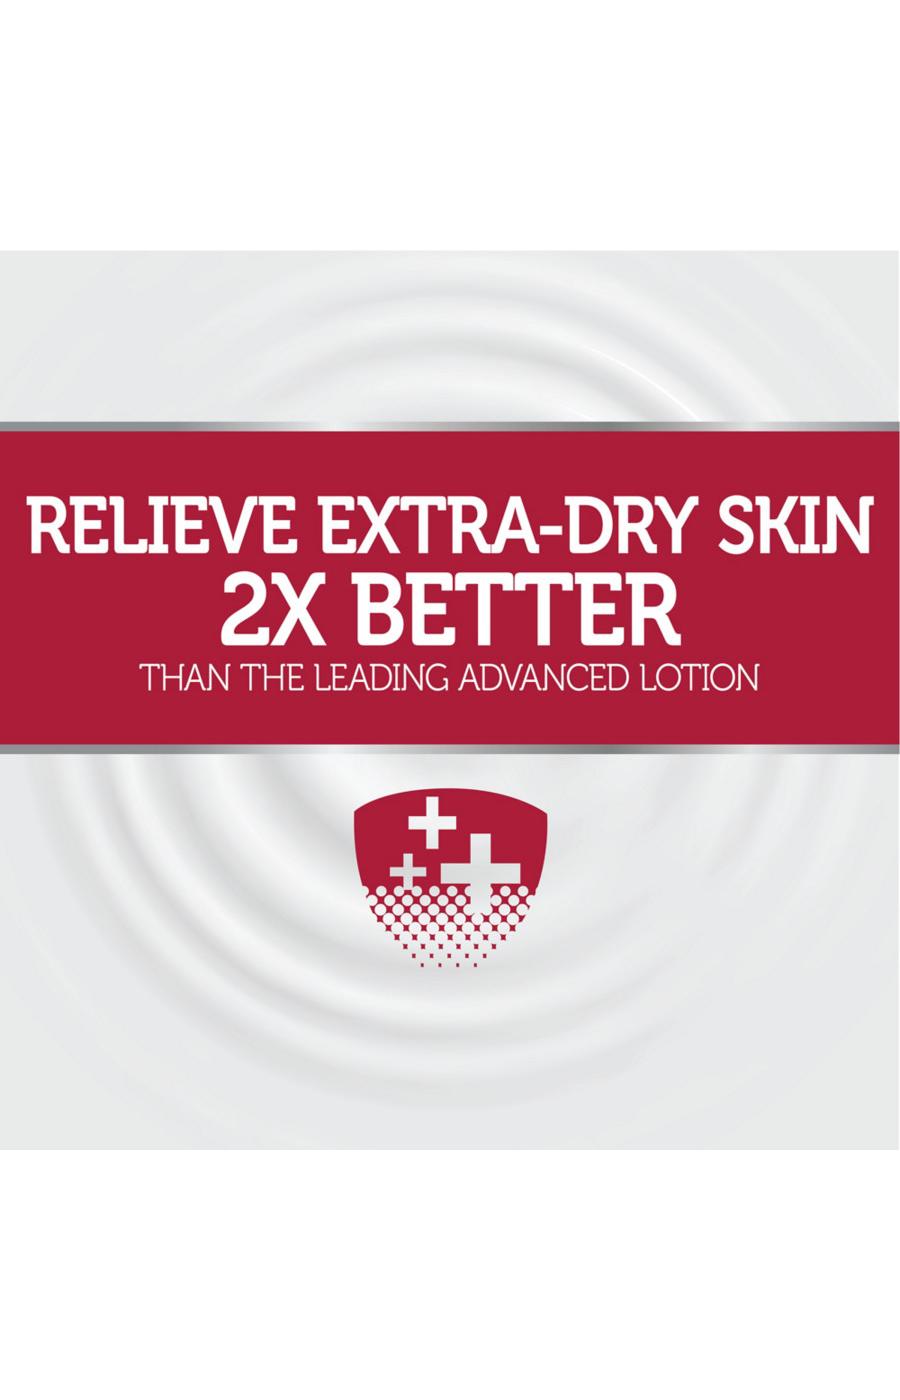 Curel Ultra Healing Lotion; image 9 of 16